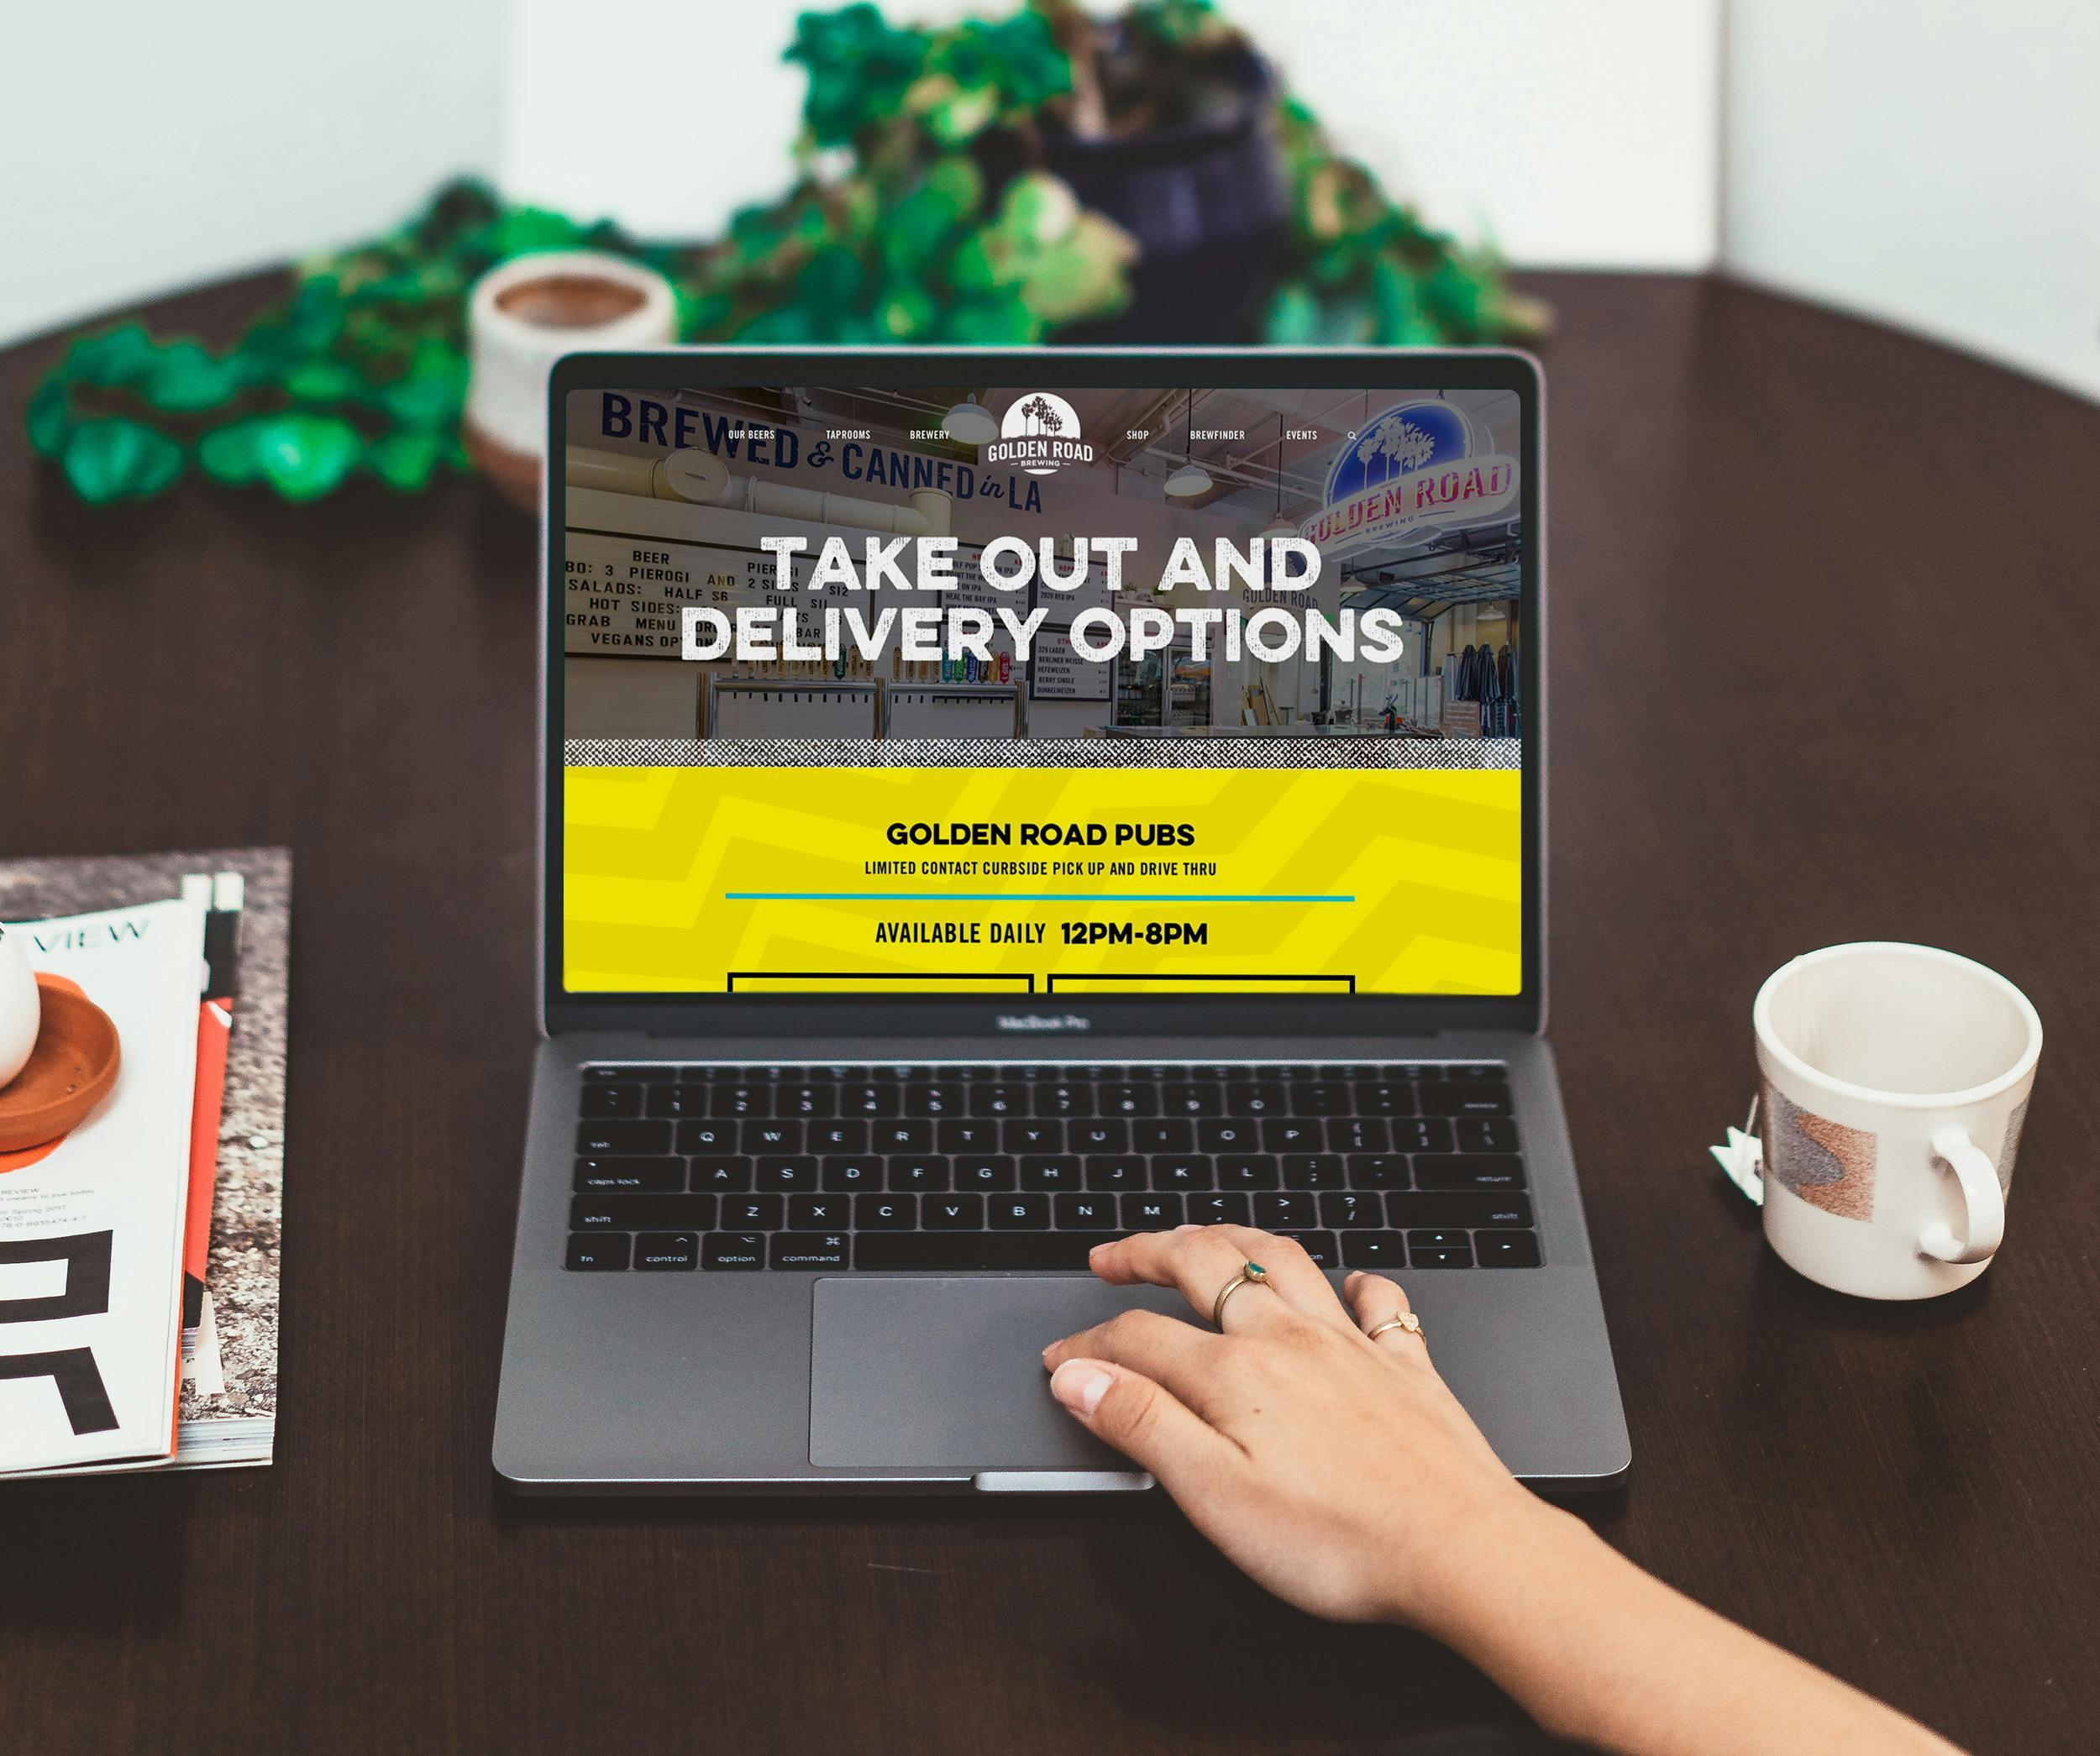 A hand is on the scroll pad of a laptop with the Golden Road homepage. There is a coffee mug to the right of the laptop. A plant in the background.